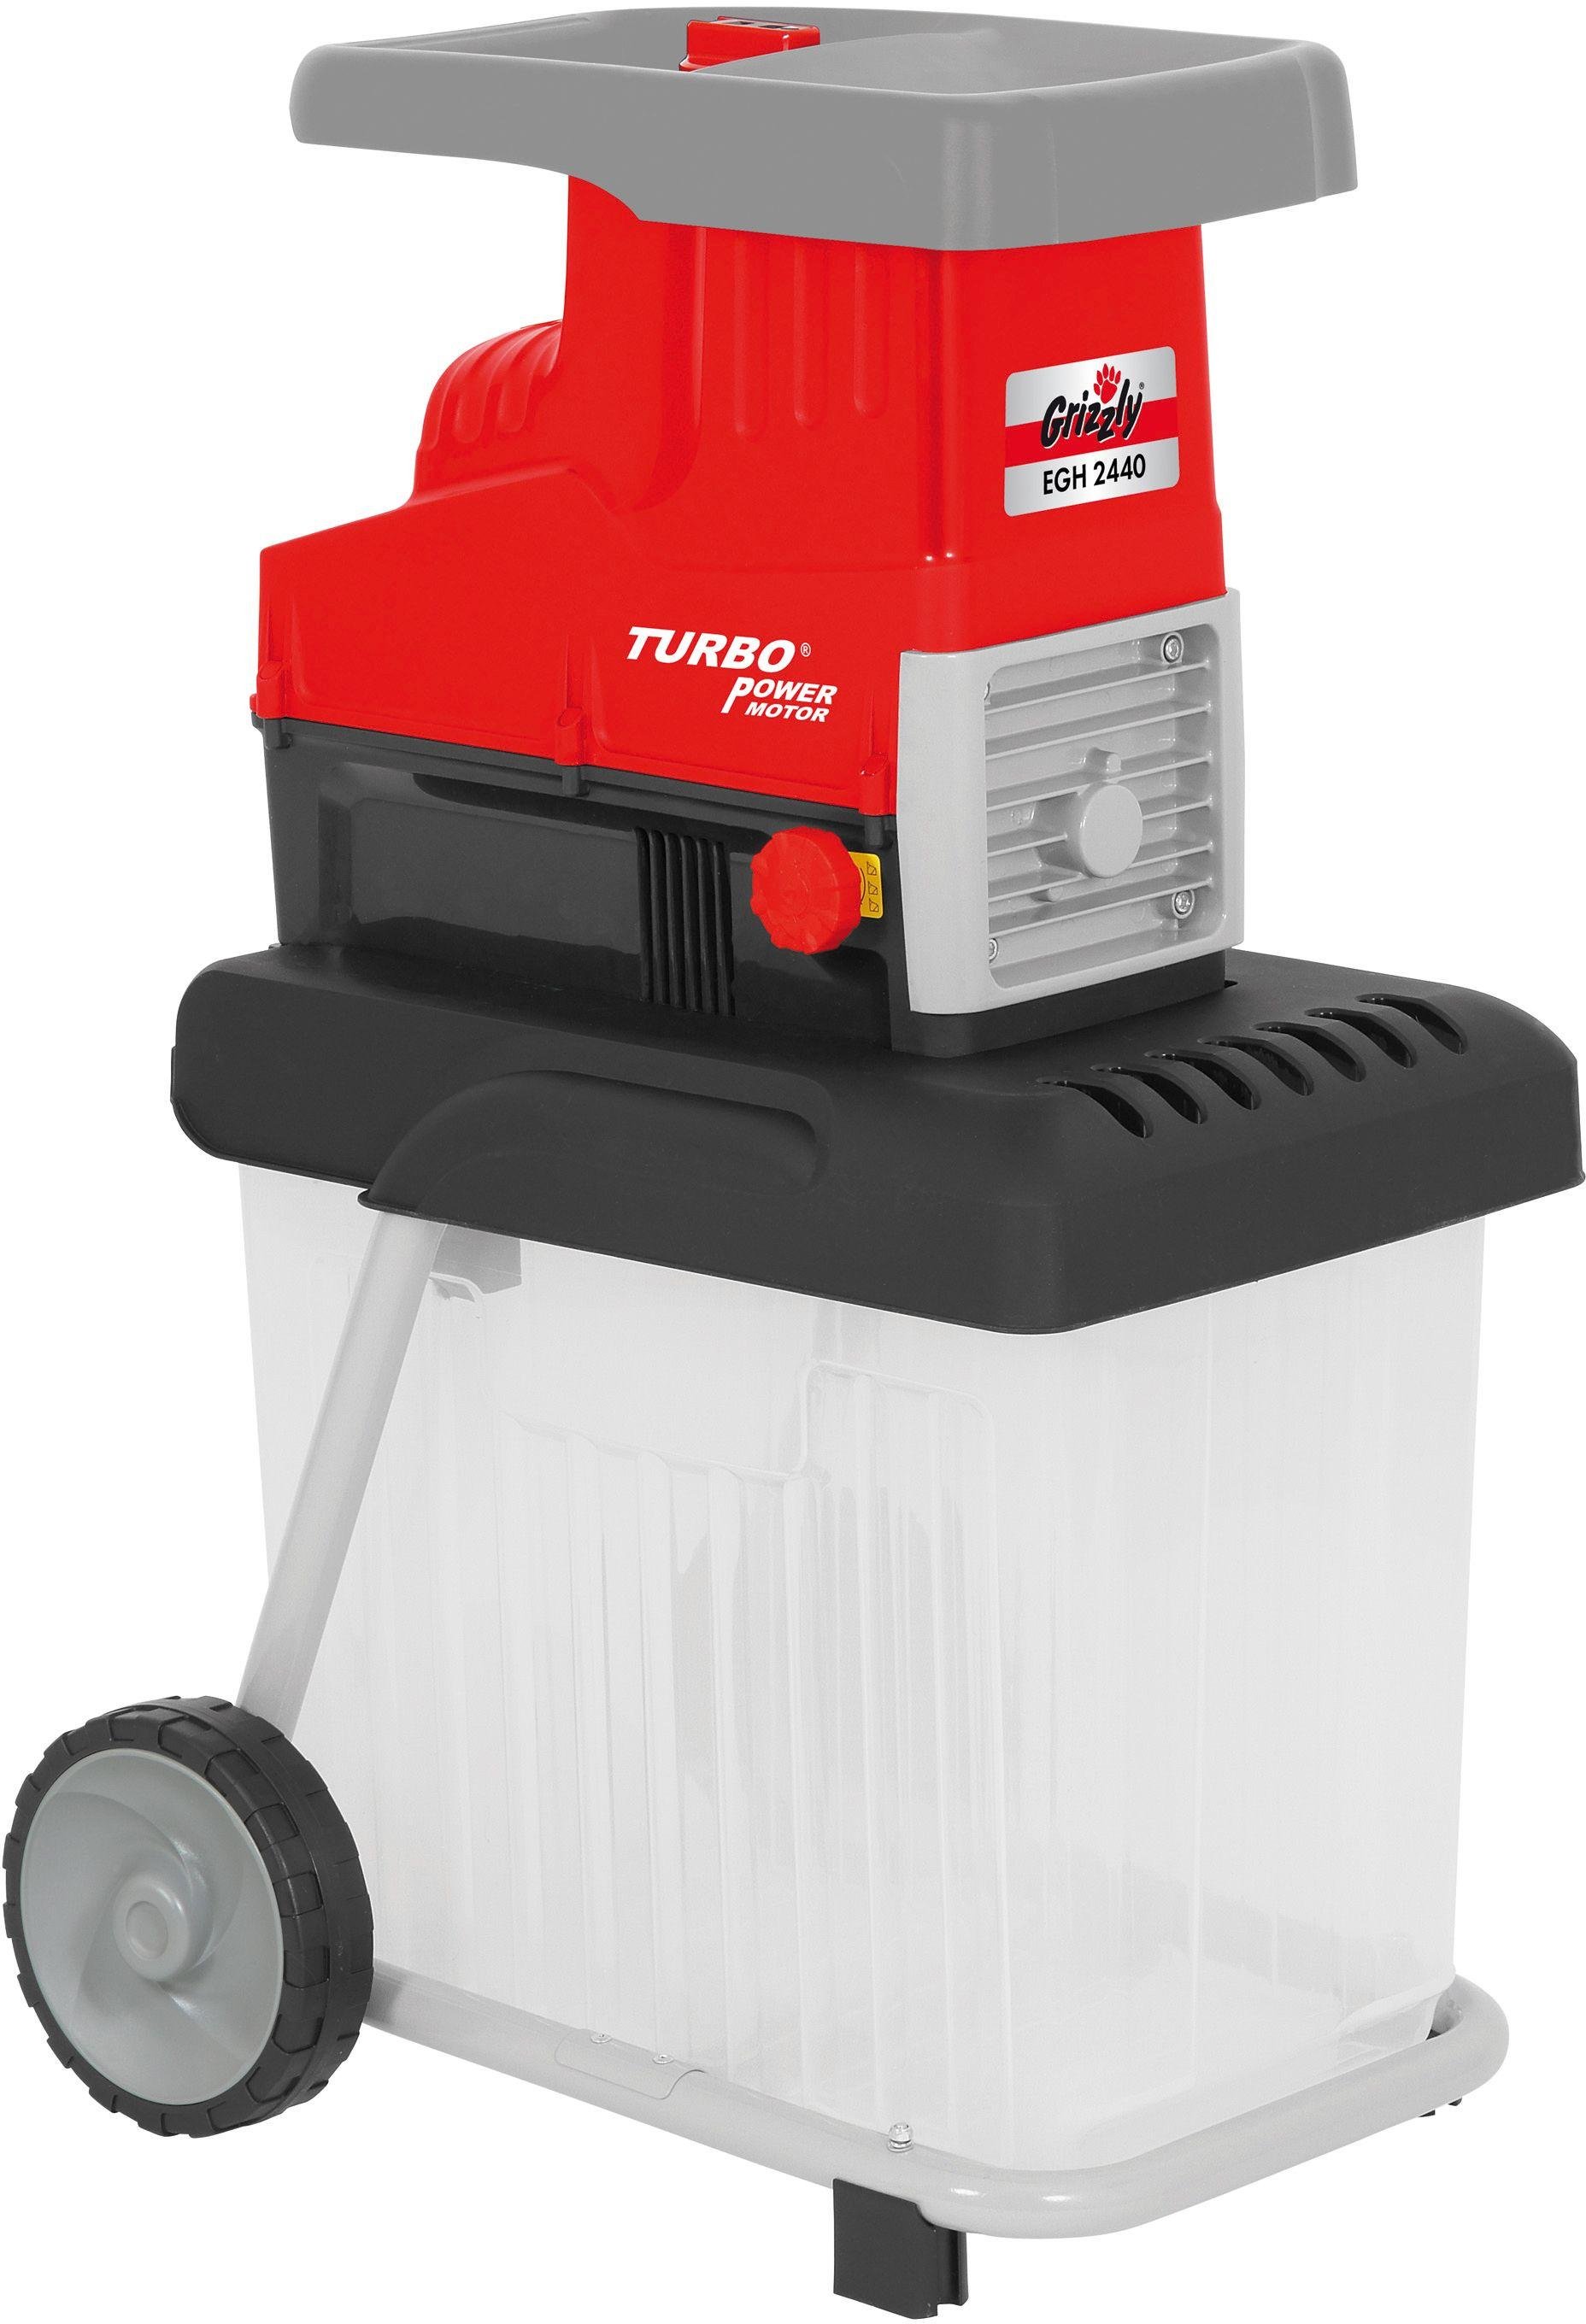 Grizzly Tools GHS2842B Garden Shredder - 2800W Review